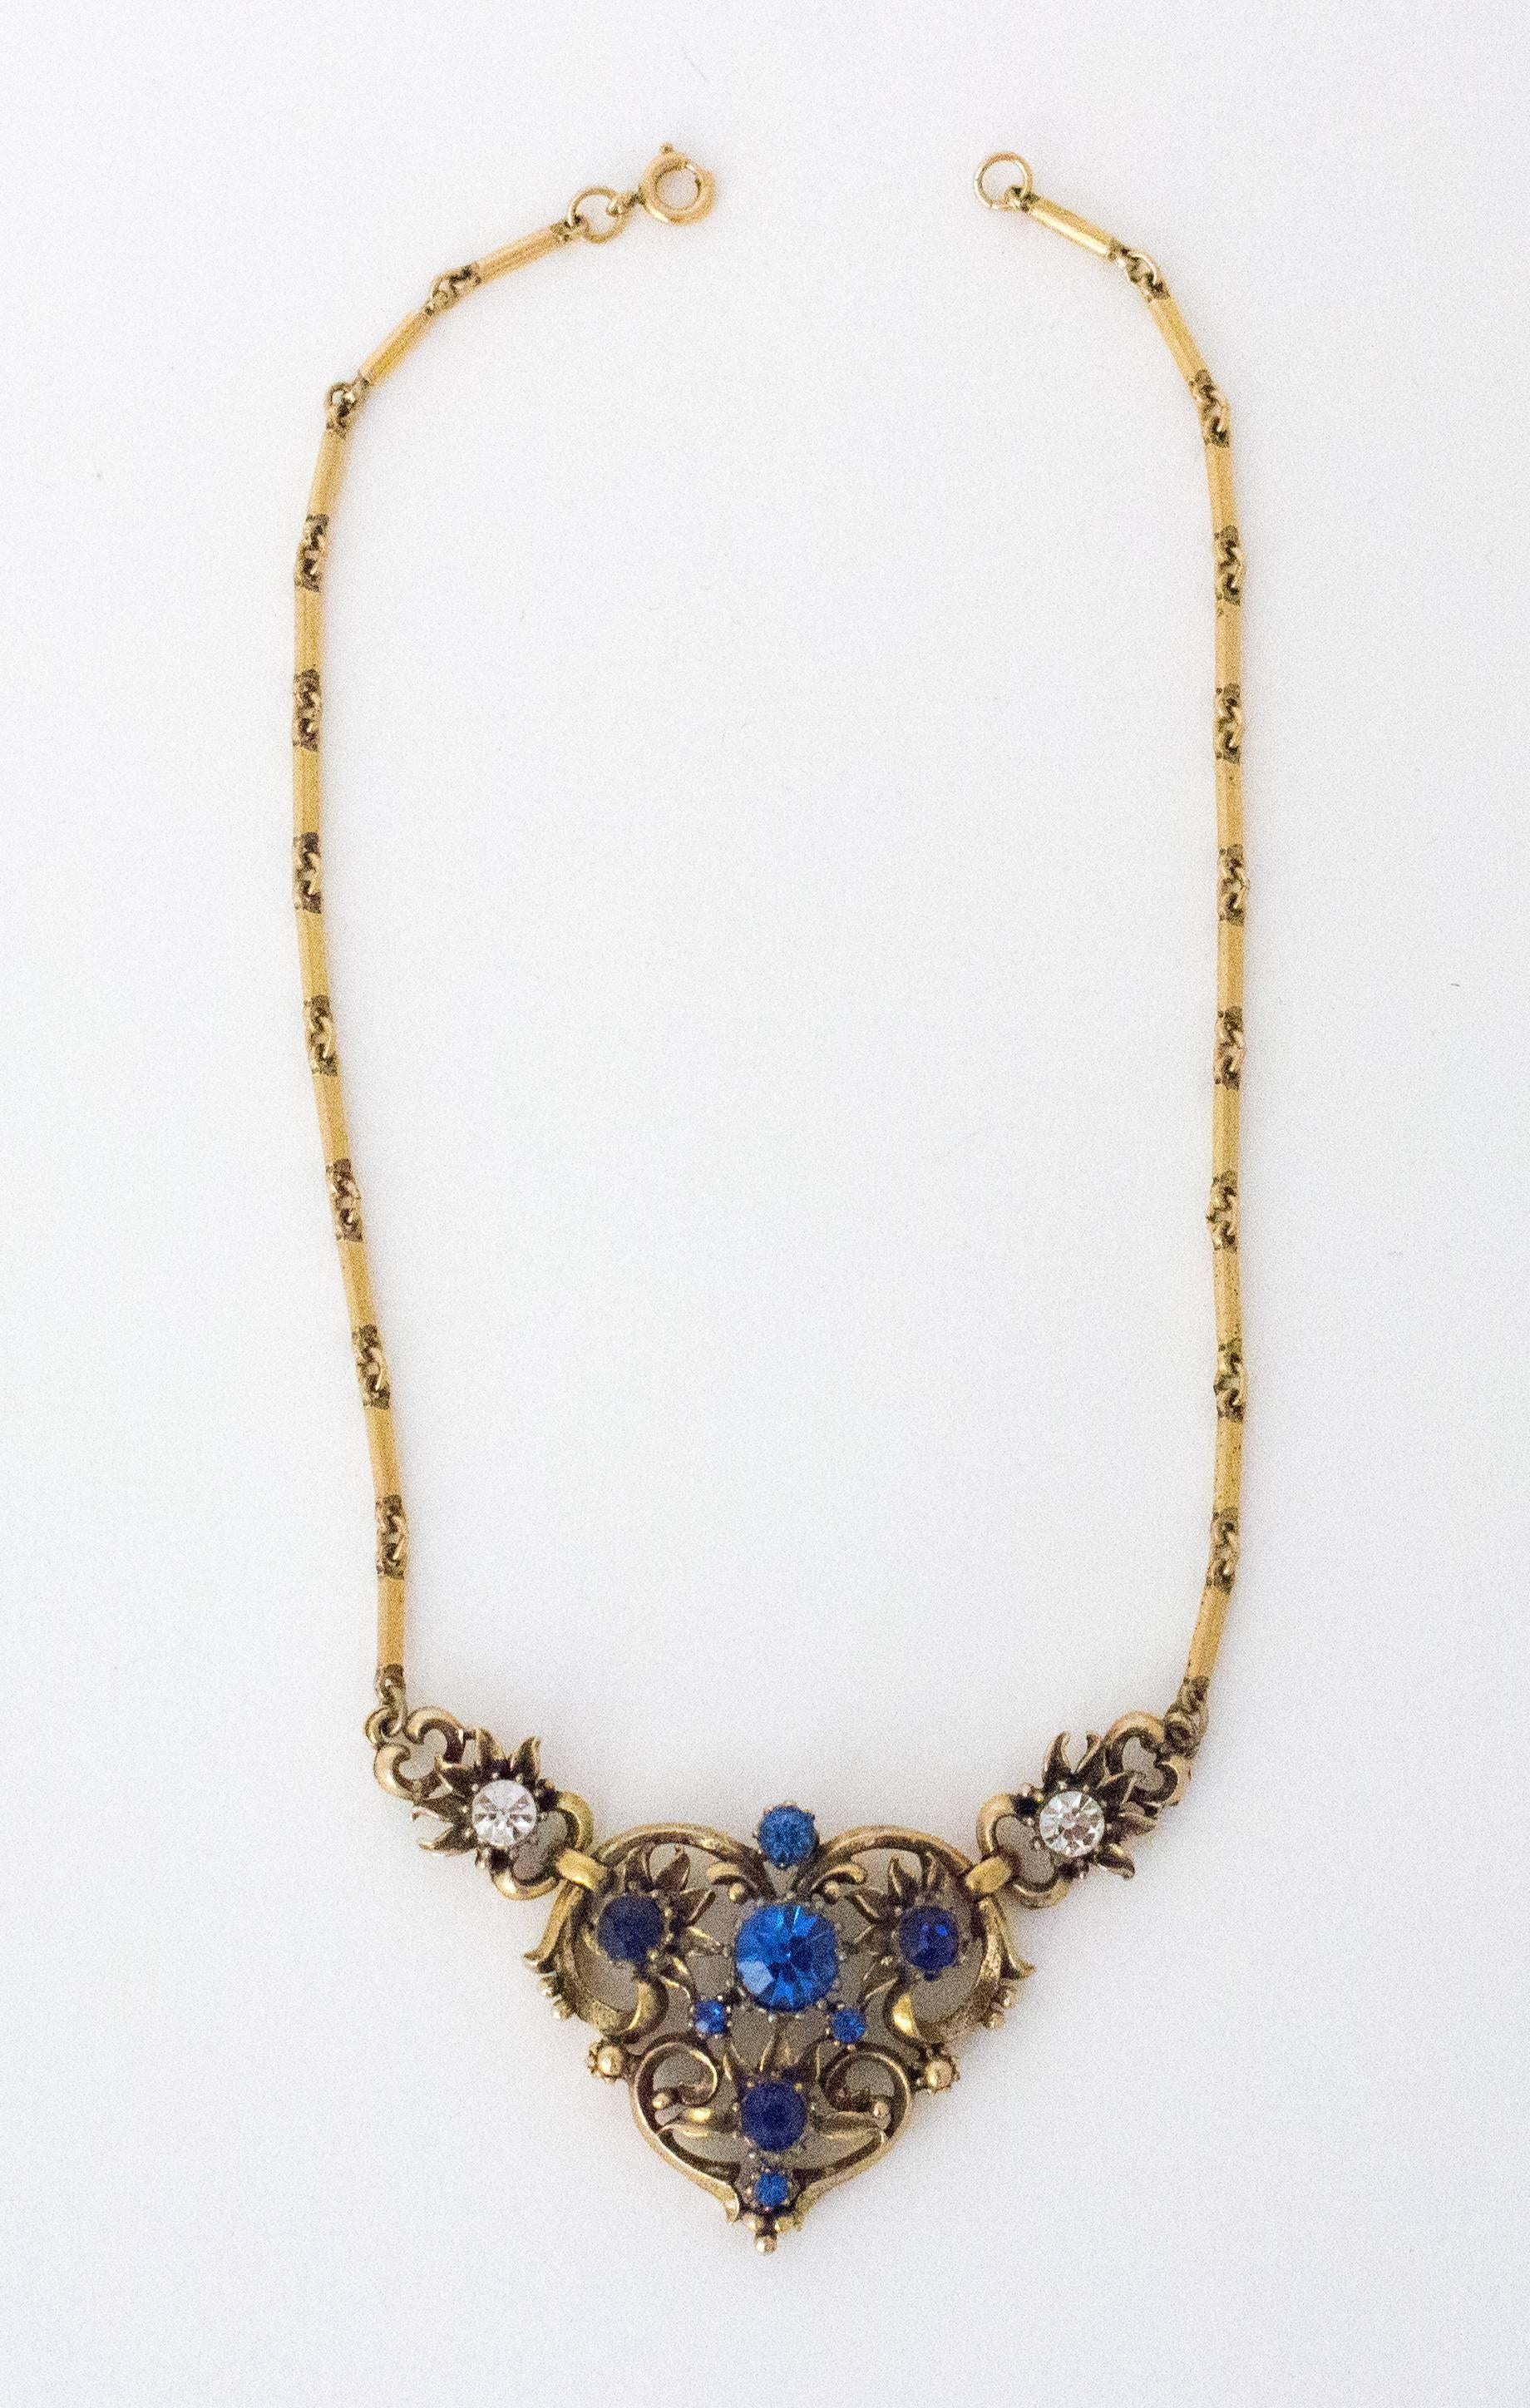 40s Coro Blue Crystal Necklace

15.25